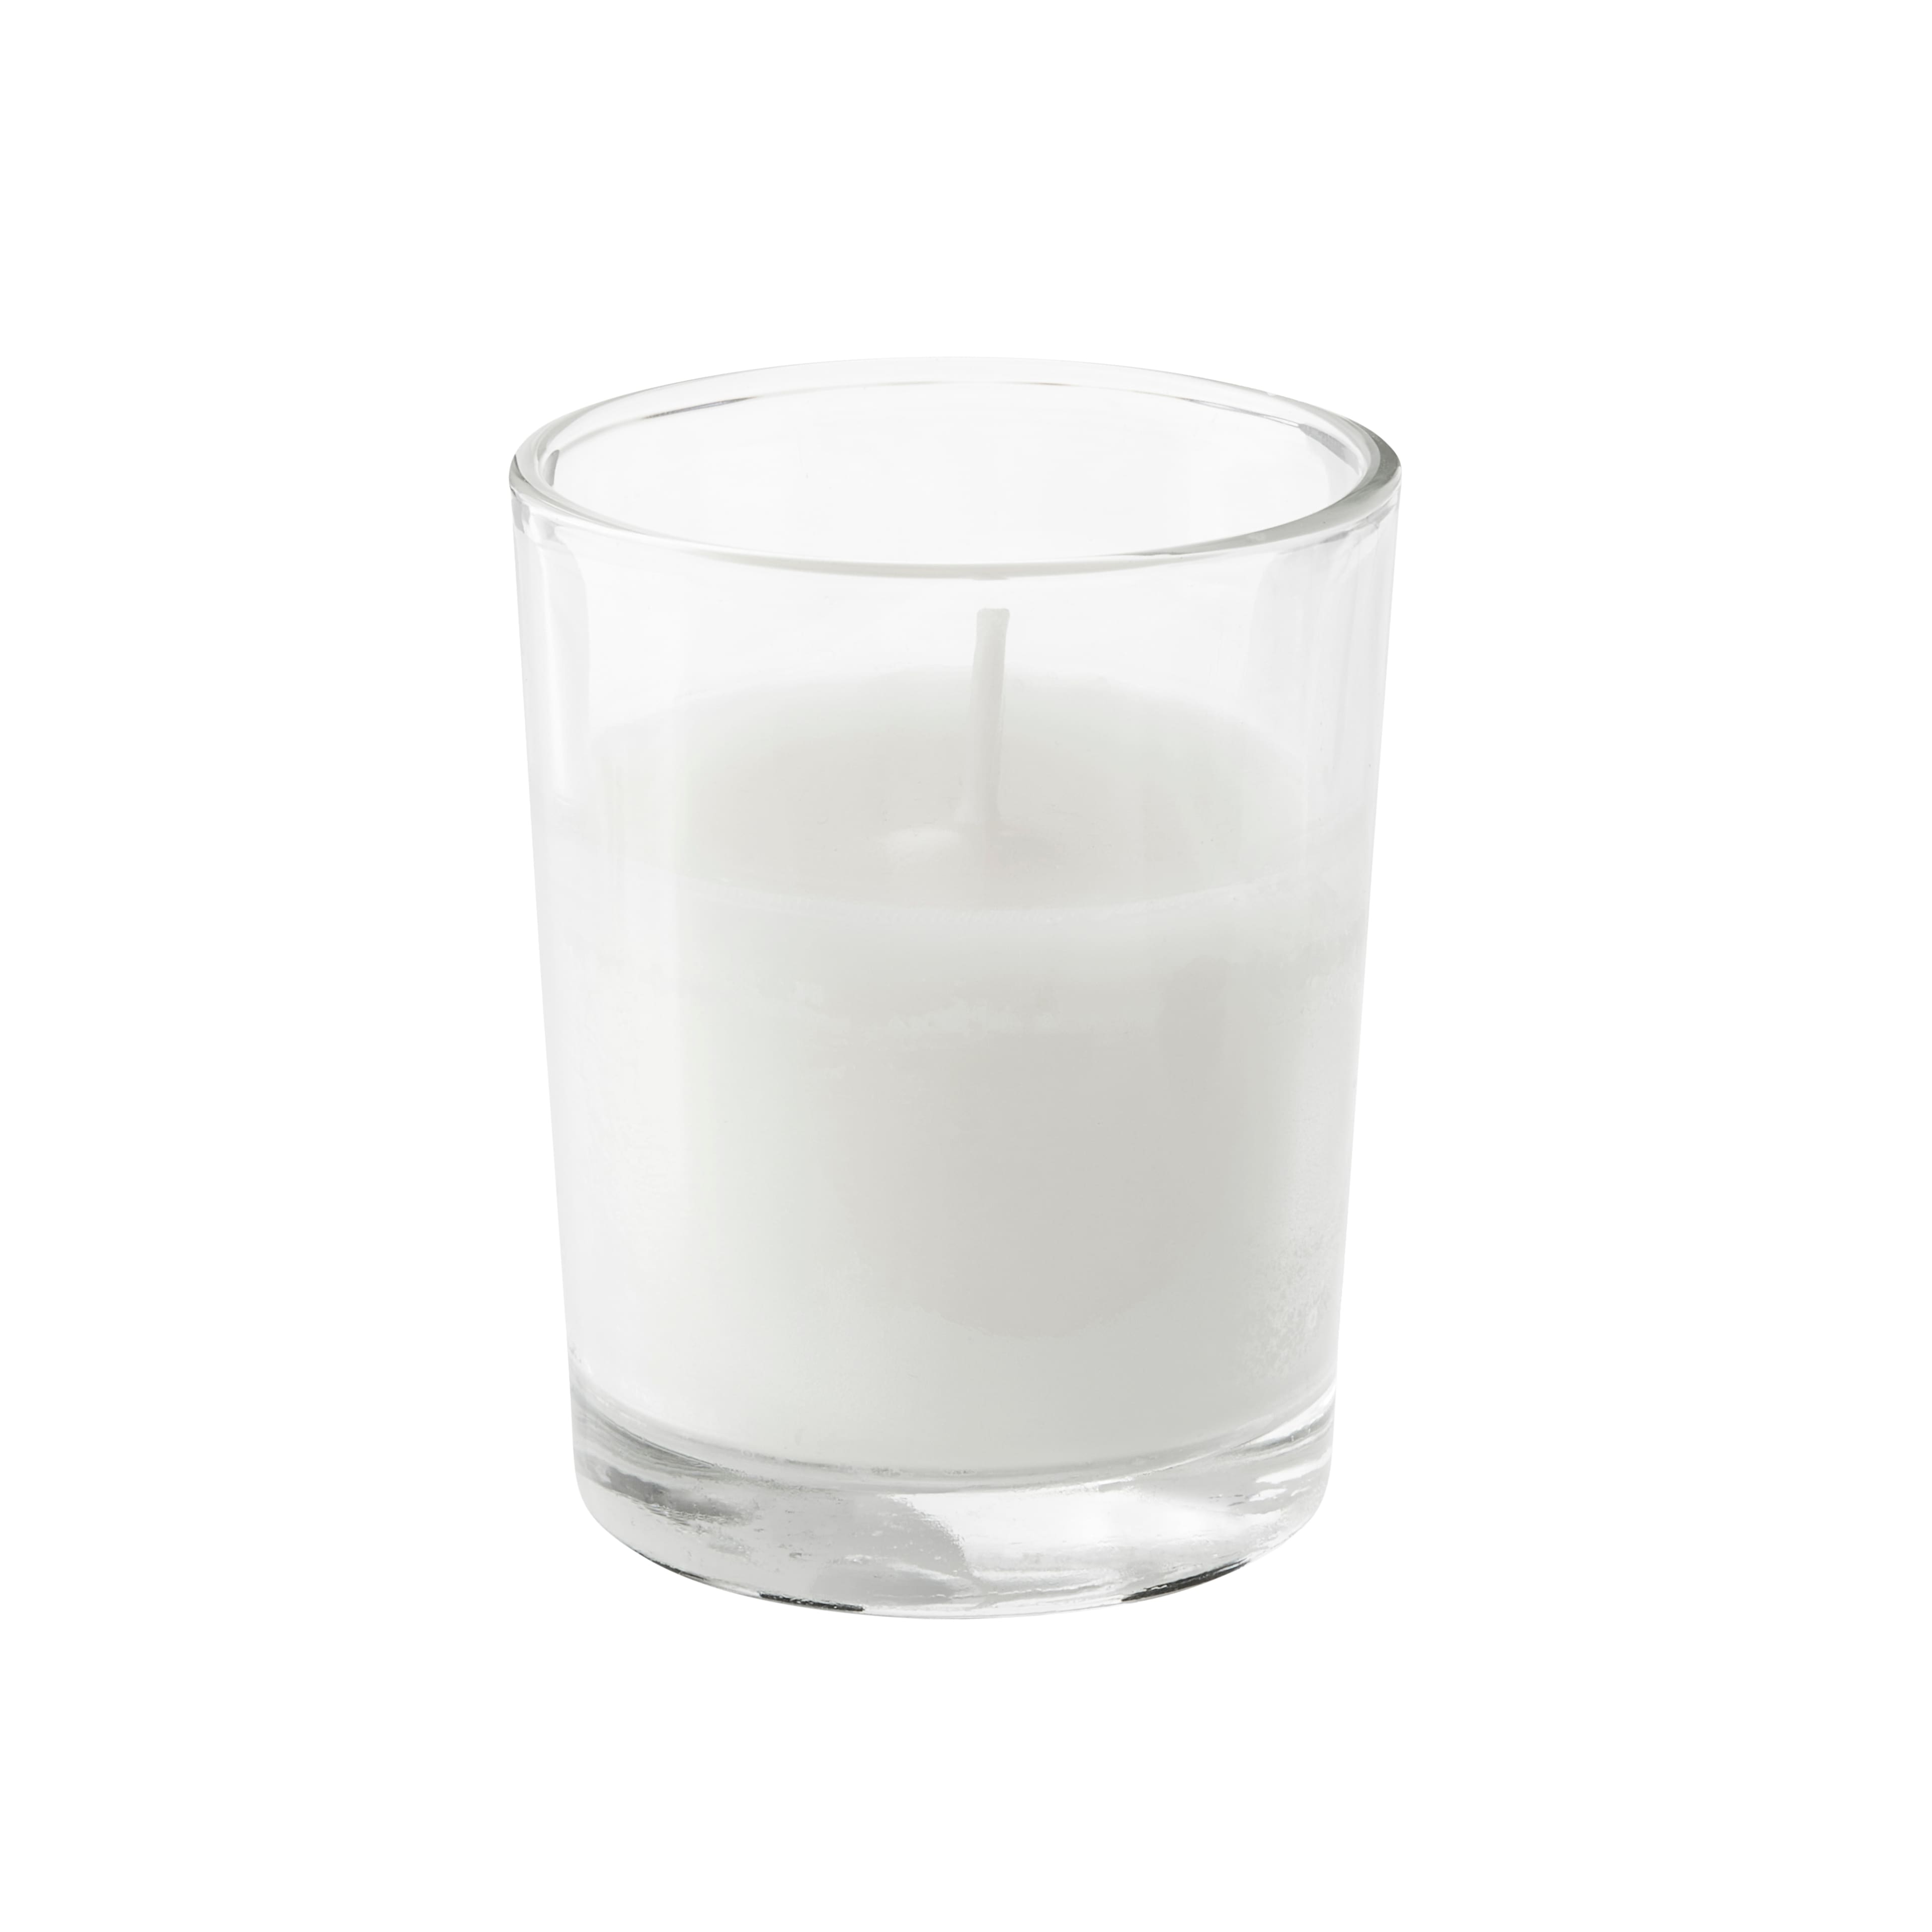 12 Packs 12 Ct 144 Total White Glass Votive Candles Pack By Ashland® Basic Elements™ Michaels